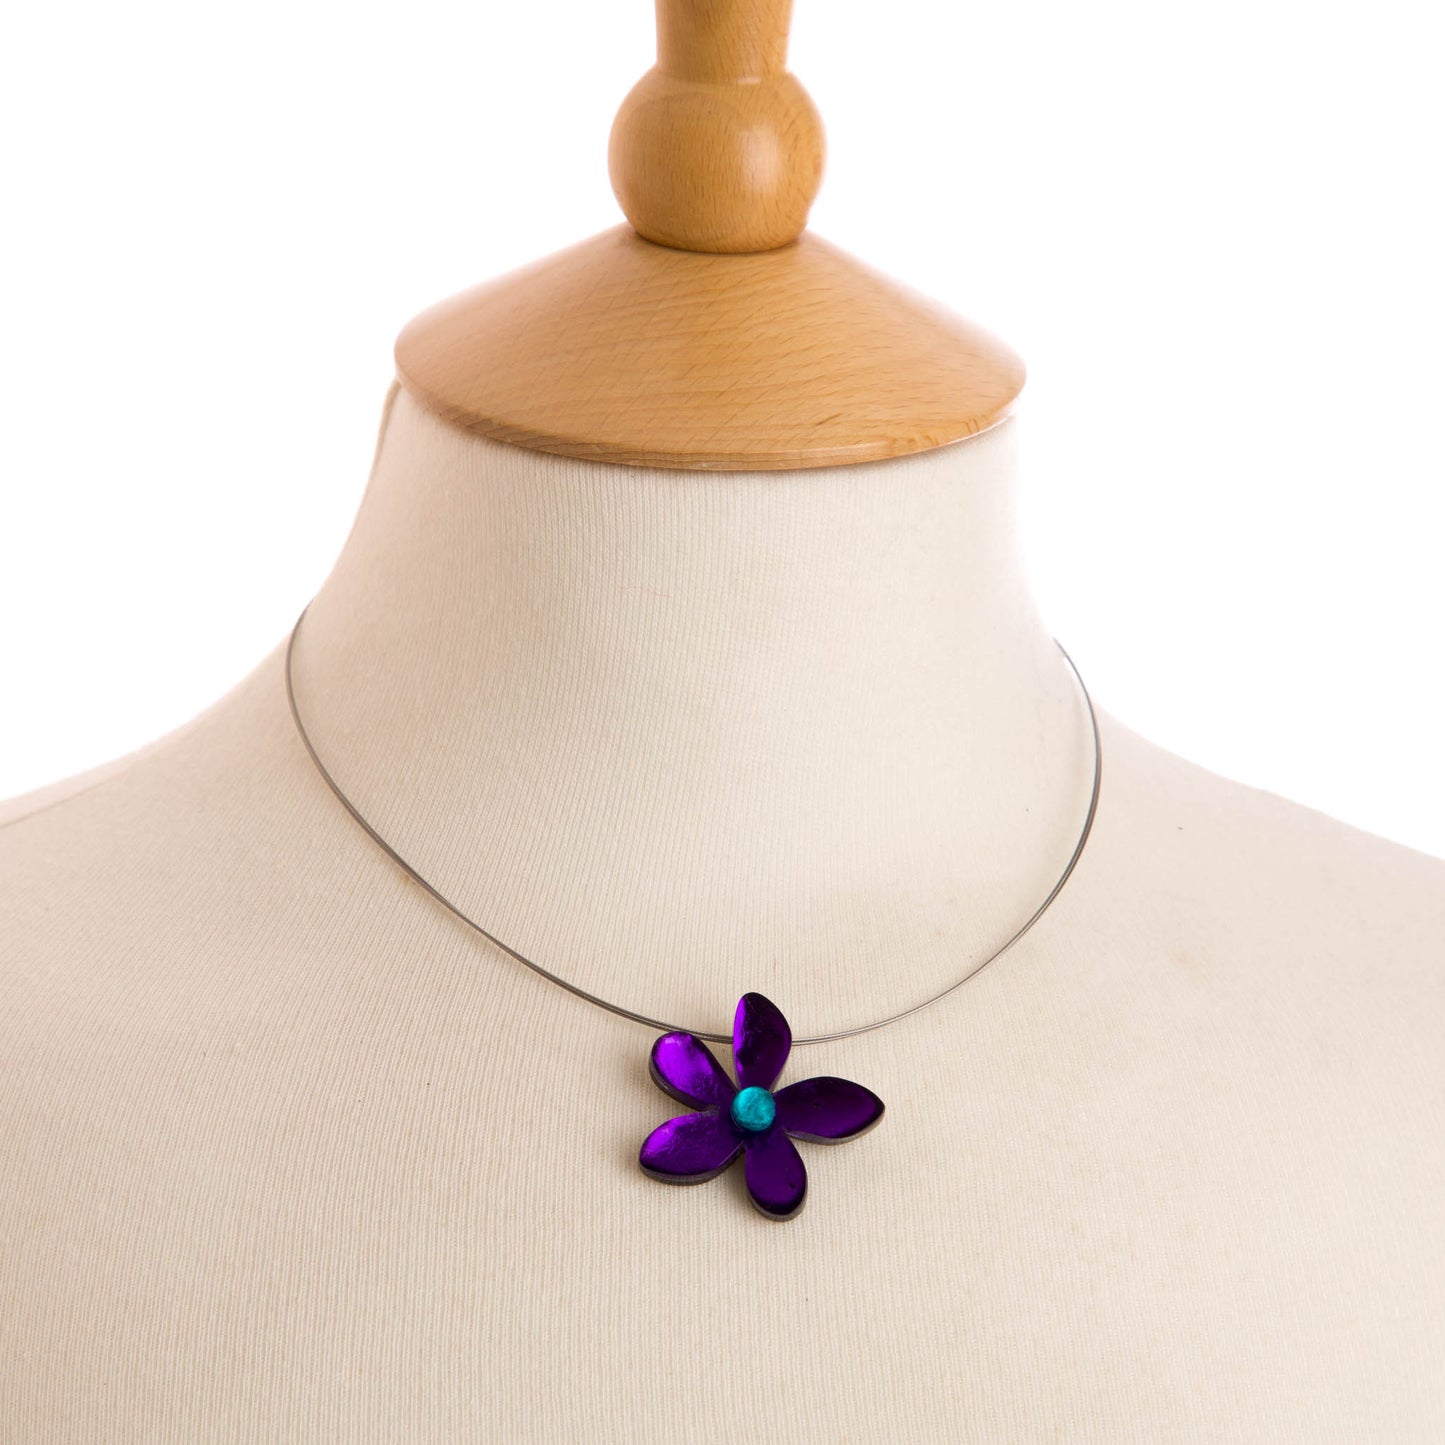 Watch this Space Small Flower Pendant, Flower Extravaganza Collection, Peacock